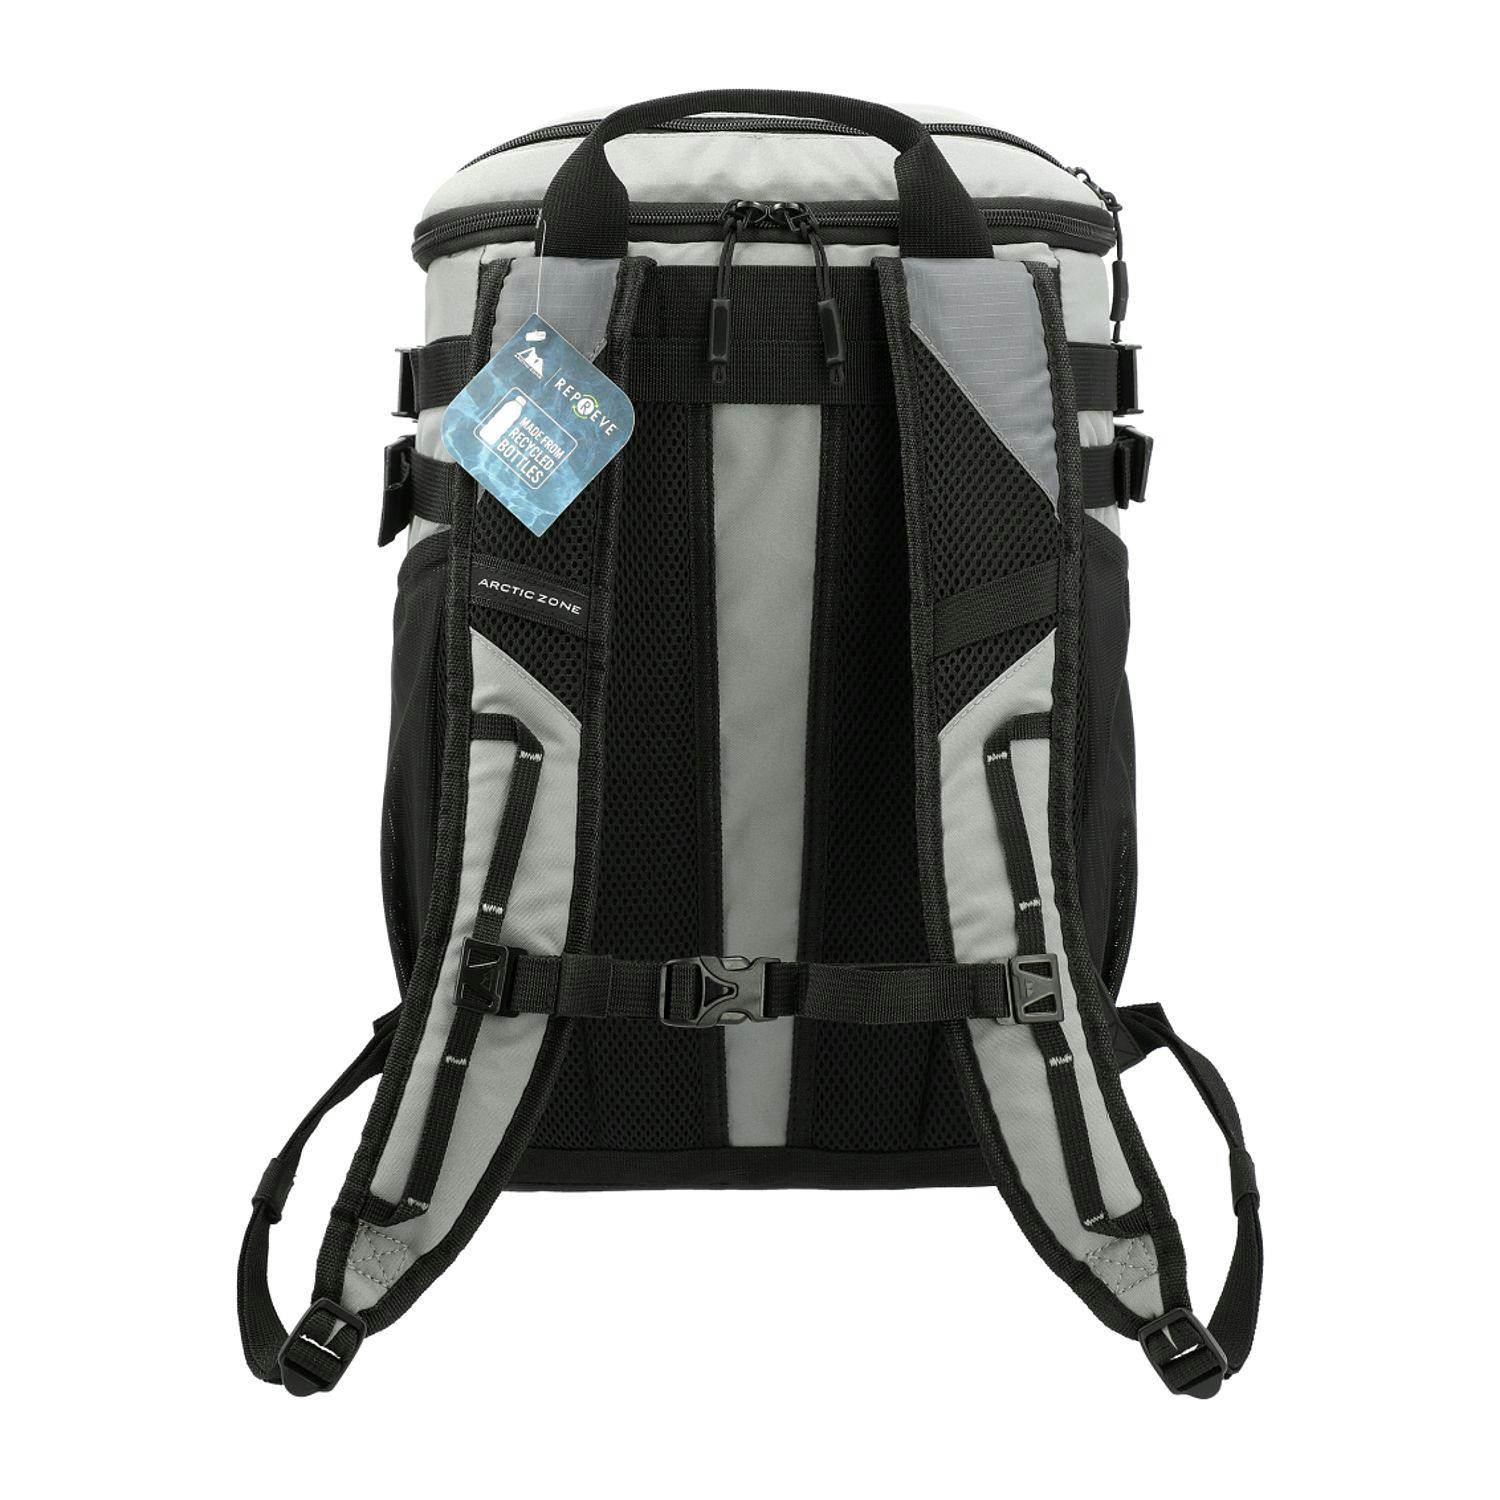 Arctic Zone® Repreve® Backpack Cooler with Sling - additional Image 2